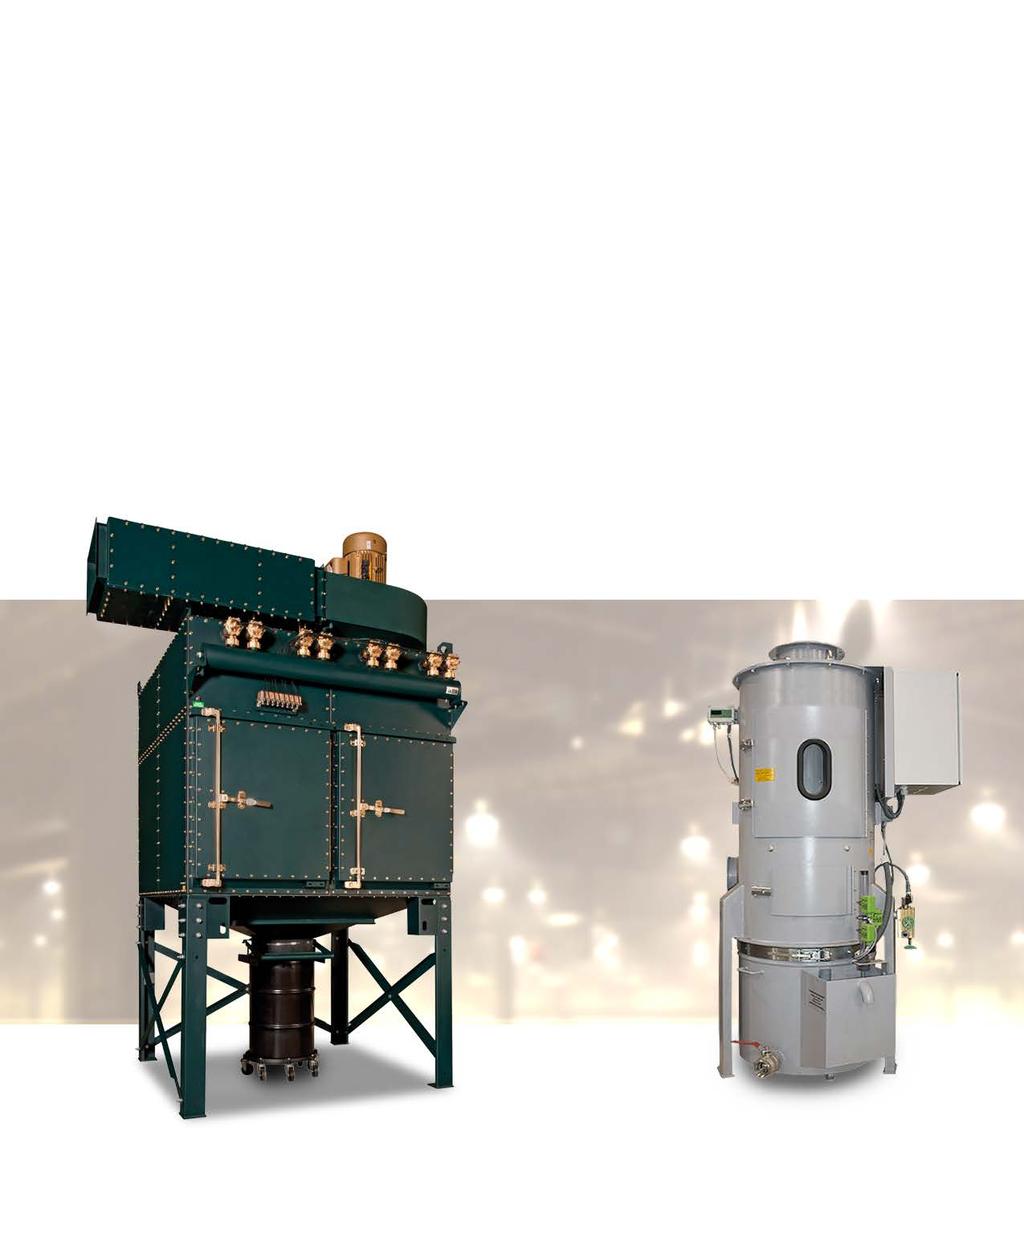 WHITE PAPER Dry Media Dust Collector or Wet Scrubber?